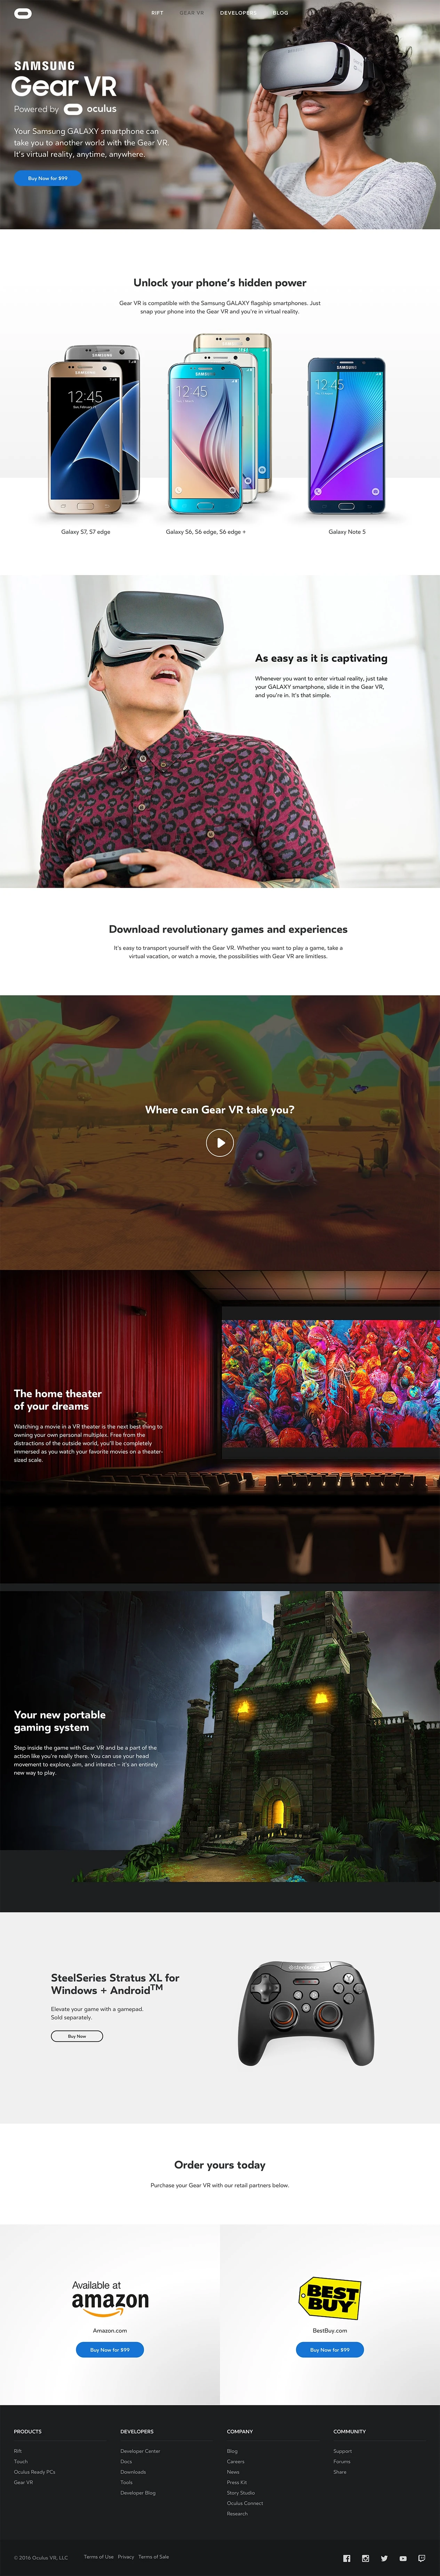 Gear VR Powered by Oculus Landing Page Example: The Gear VR is groundbreaking VR technology that combines a lightweight, wireless headset with the convenience of the full 2015 line of Samsung GALAXY smartphones.